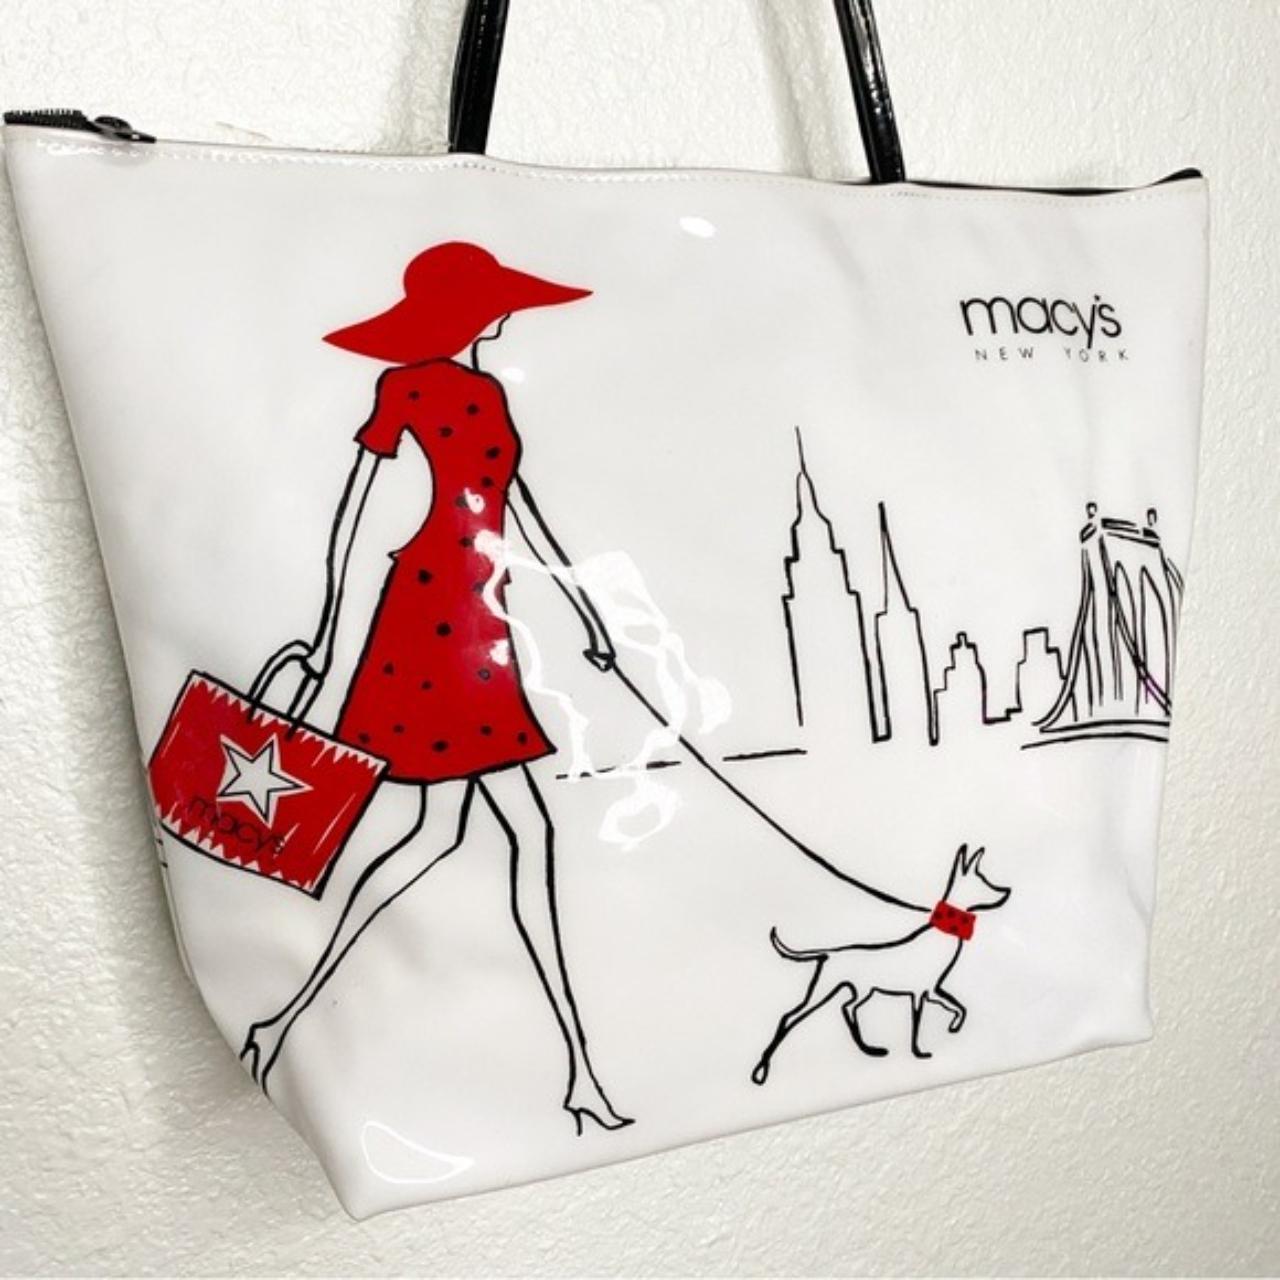 Macy's Red Tote Bags